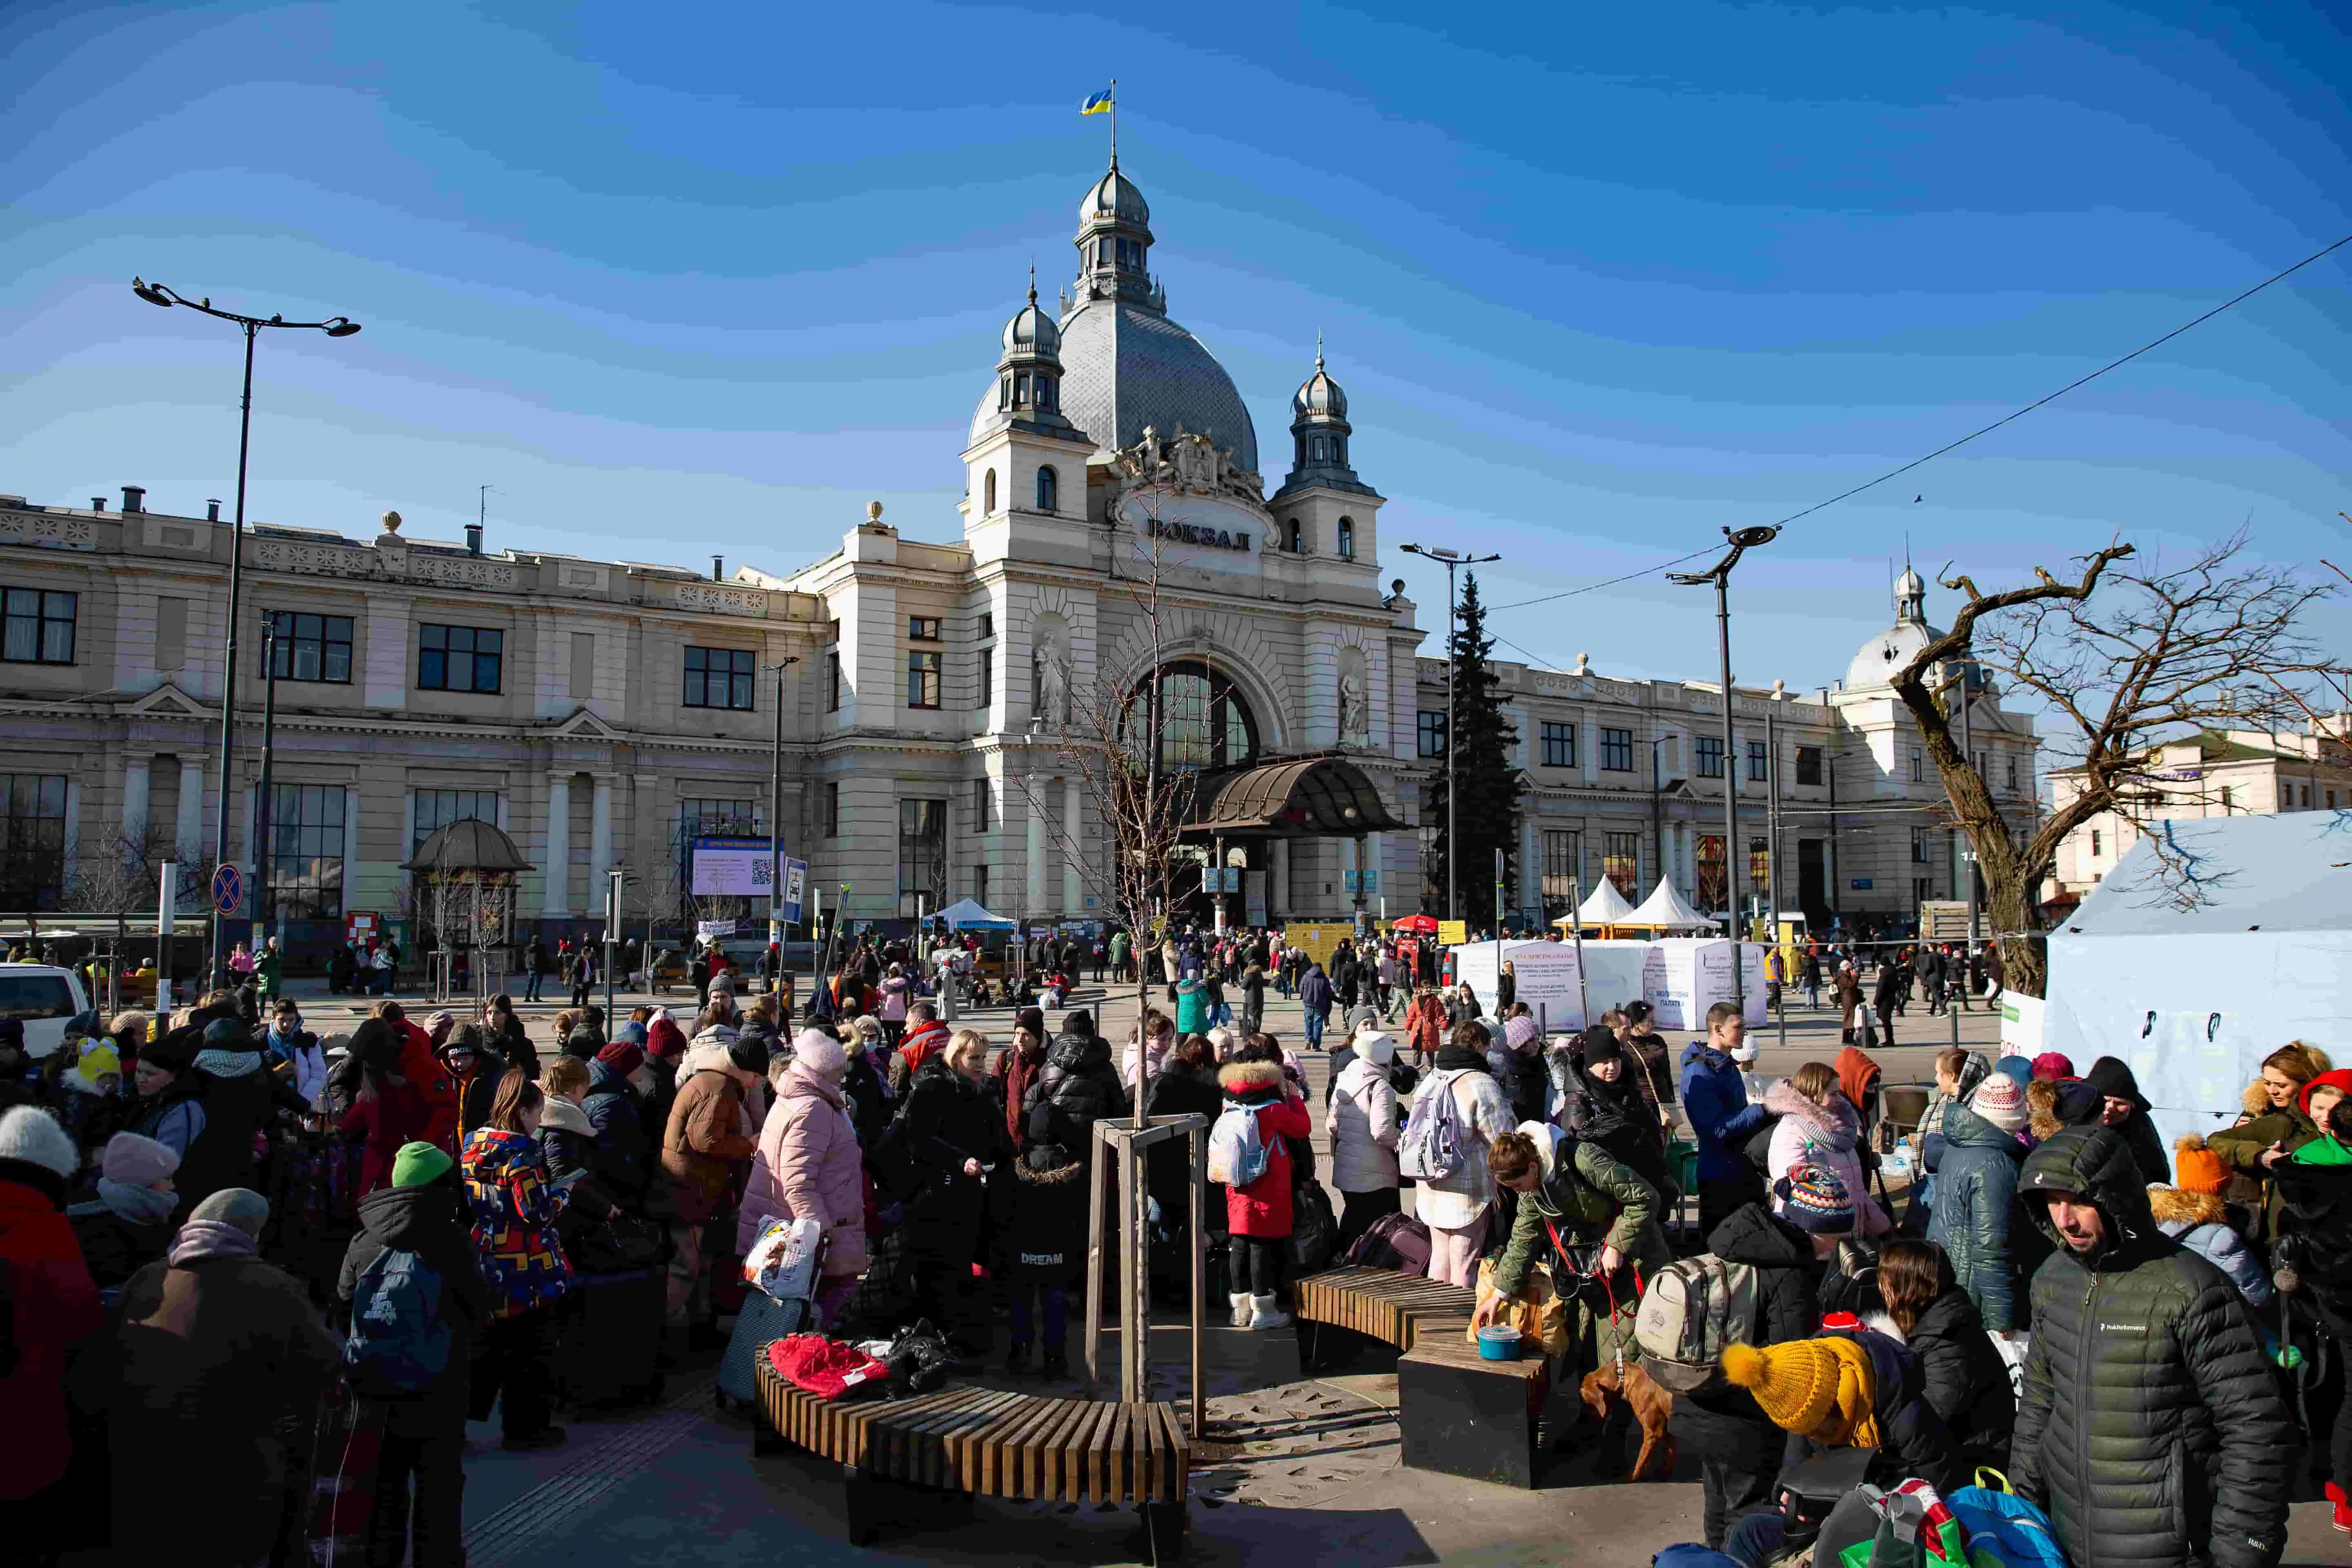 Tens of thousands of people are evacuating through the train station at Lviv in Ukraine.